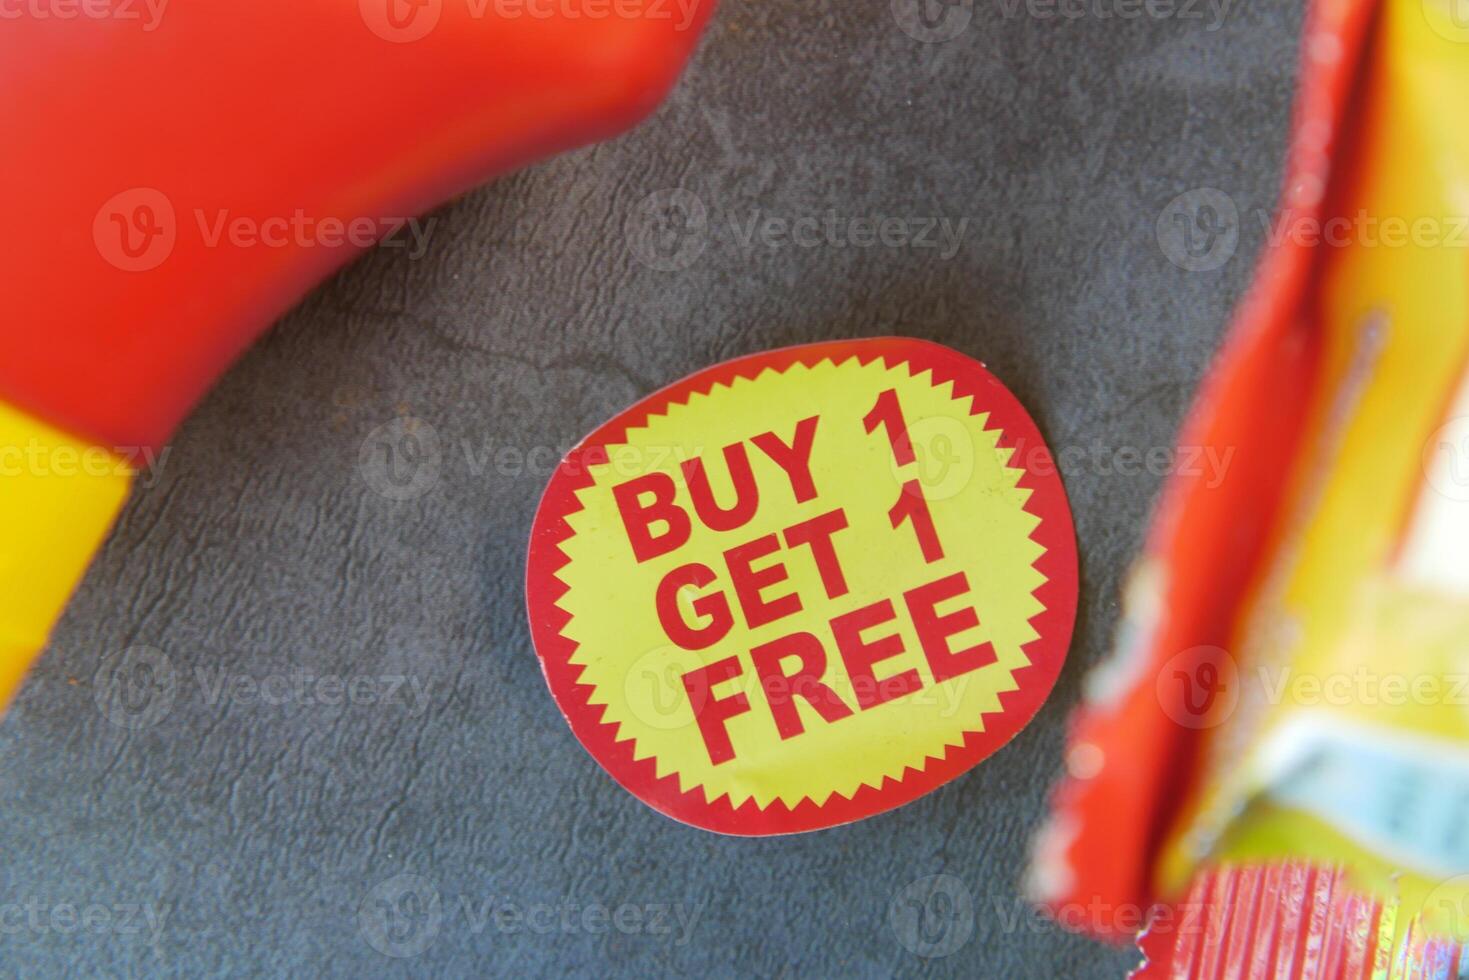 buy 1 get 1 free offer sticker and prodcuts on table photo